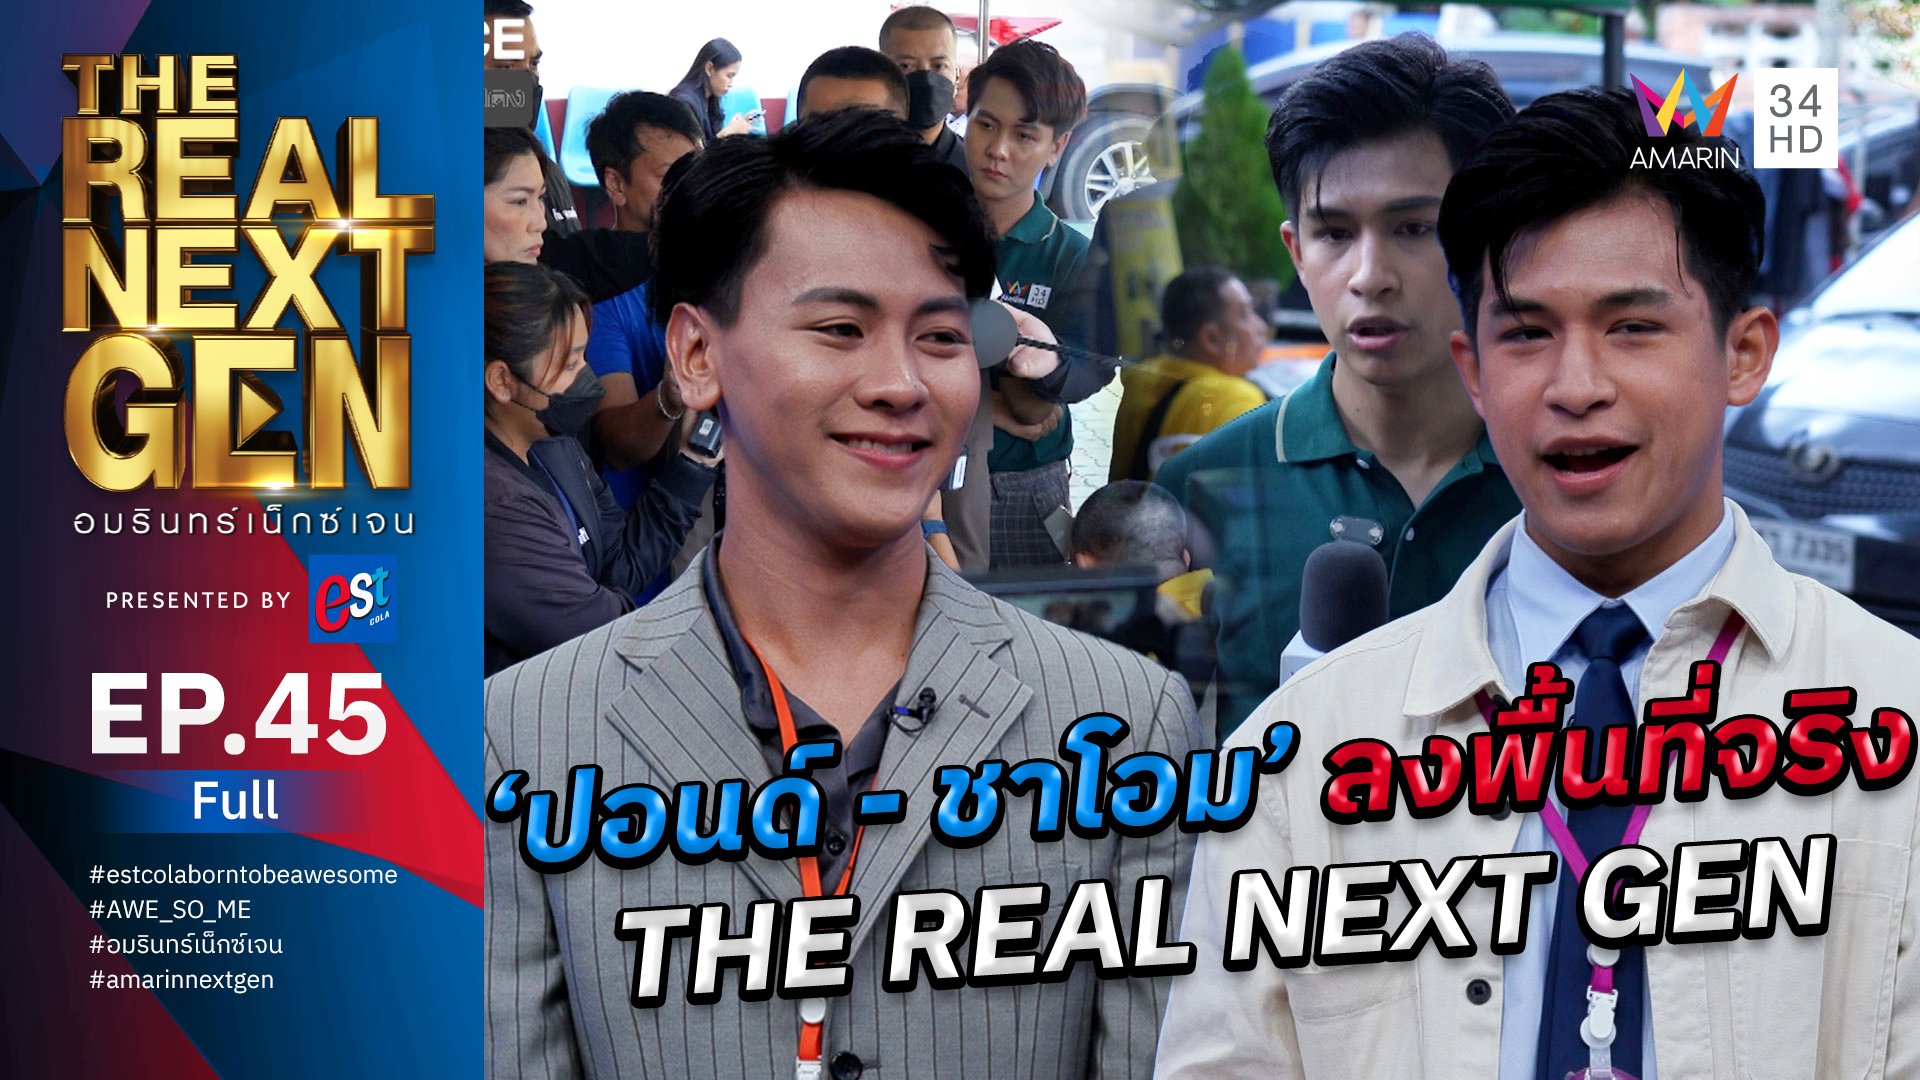 The Real Next Gen อมรินทร์เน็กซ์เจน | EP.45 THE REAL NEXT GEN อมรินทร์เน็กซ์เจน Presented By est cola  | 17 พ.ย. 66 | AMARIN TVHD34